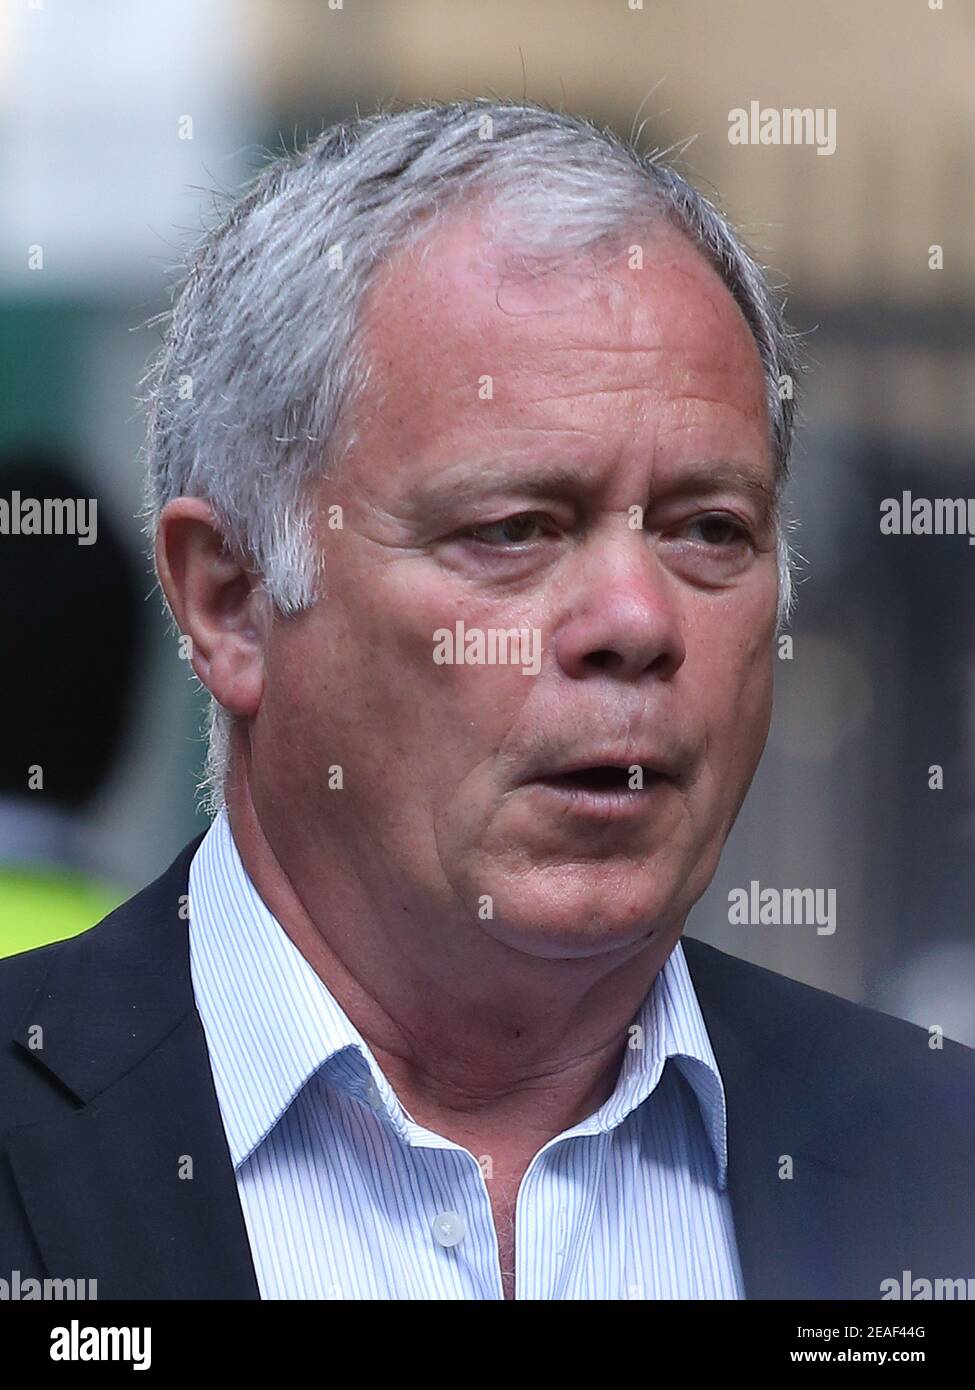 Former Royal Household official Ronald Harper arrives at Southwark Crown Court, London, as the former Royal Household official who accepted more than £100,000 in bribes to award contracts for work at royal residences including Buckingham Palace, has been jailed for five years. Picture date: Monday July 18, 2016. Stock Photo